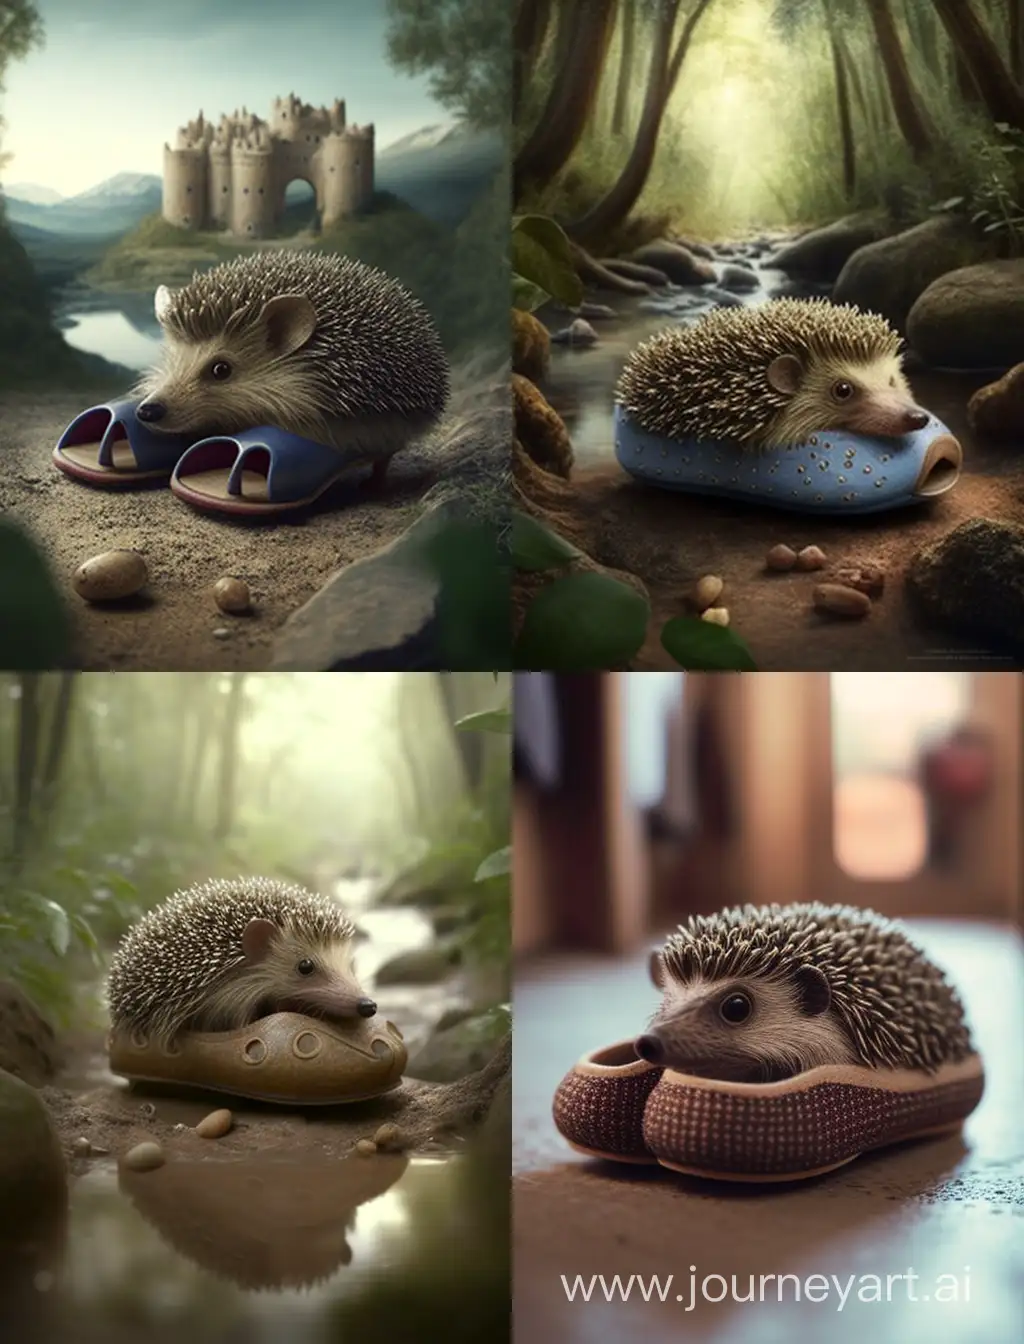 A world in which hedgehogs walk in rubber slippers